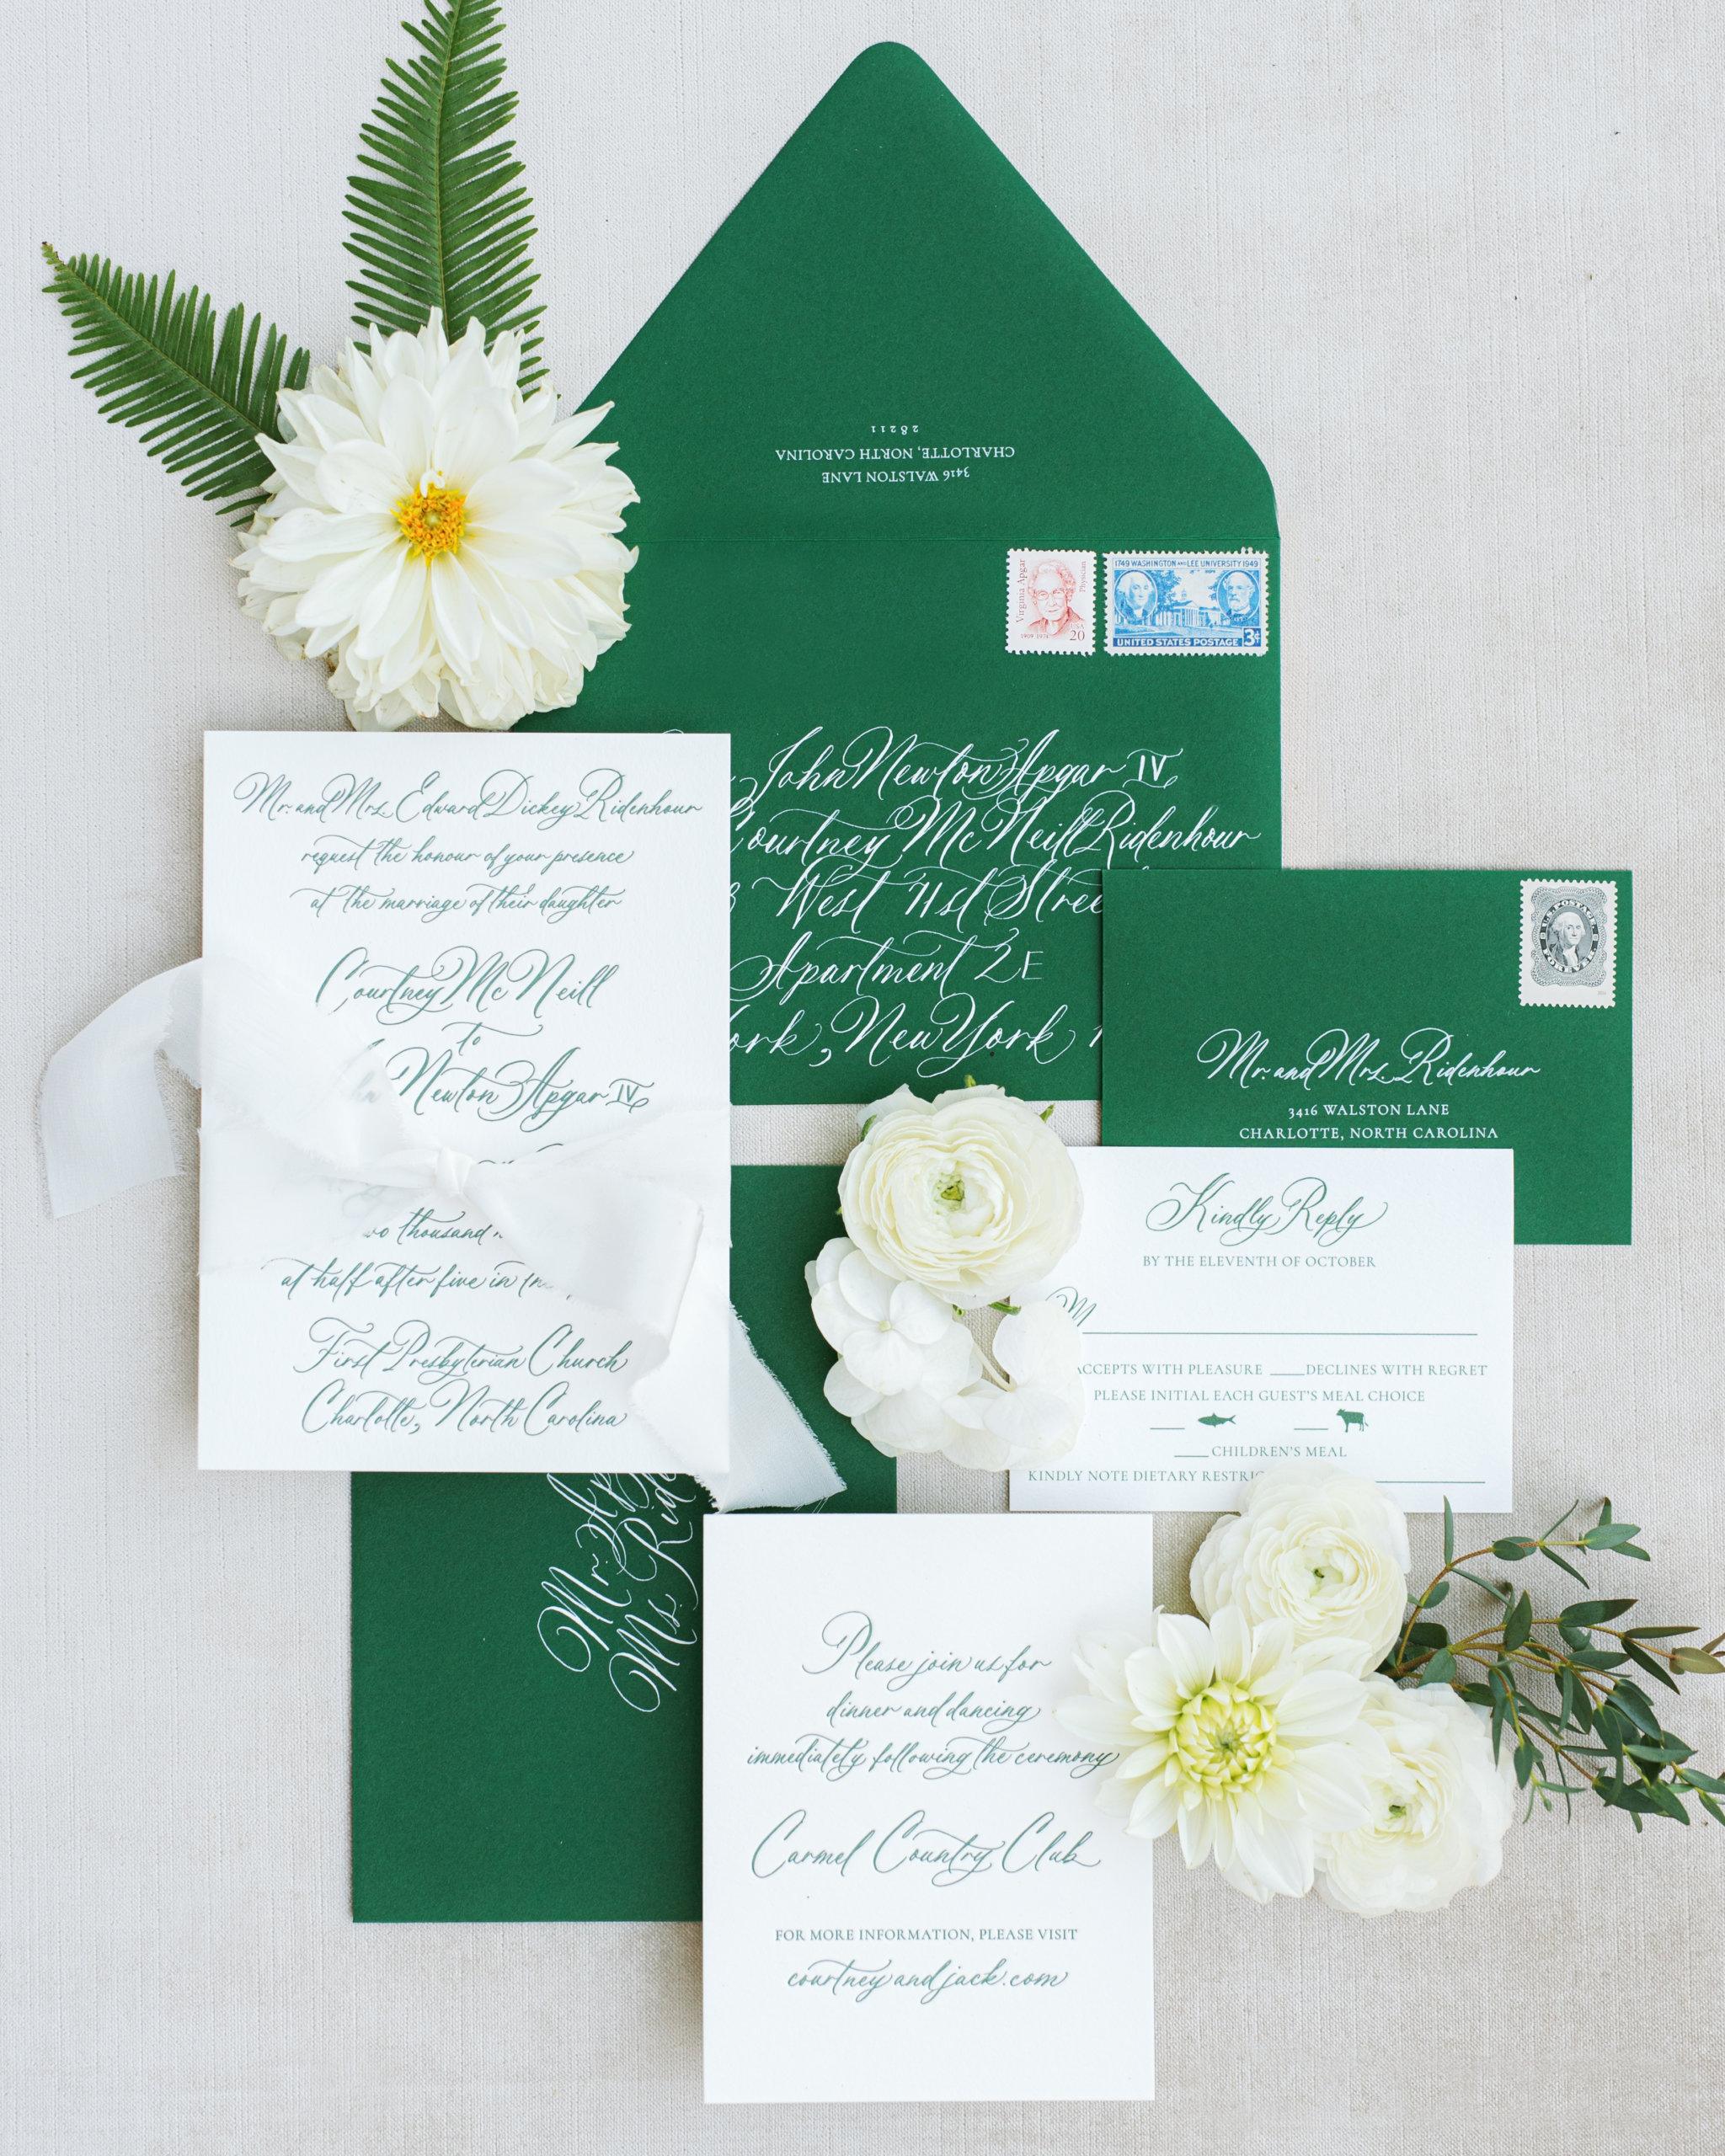 Green wedding invitation suite with white flowers